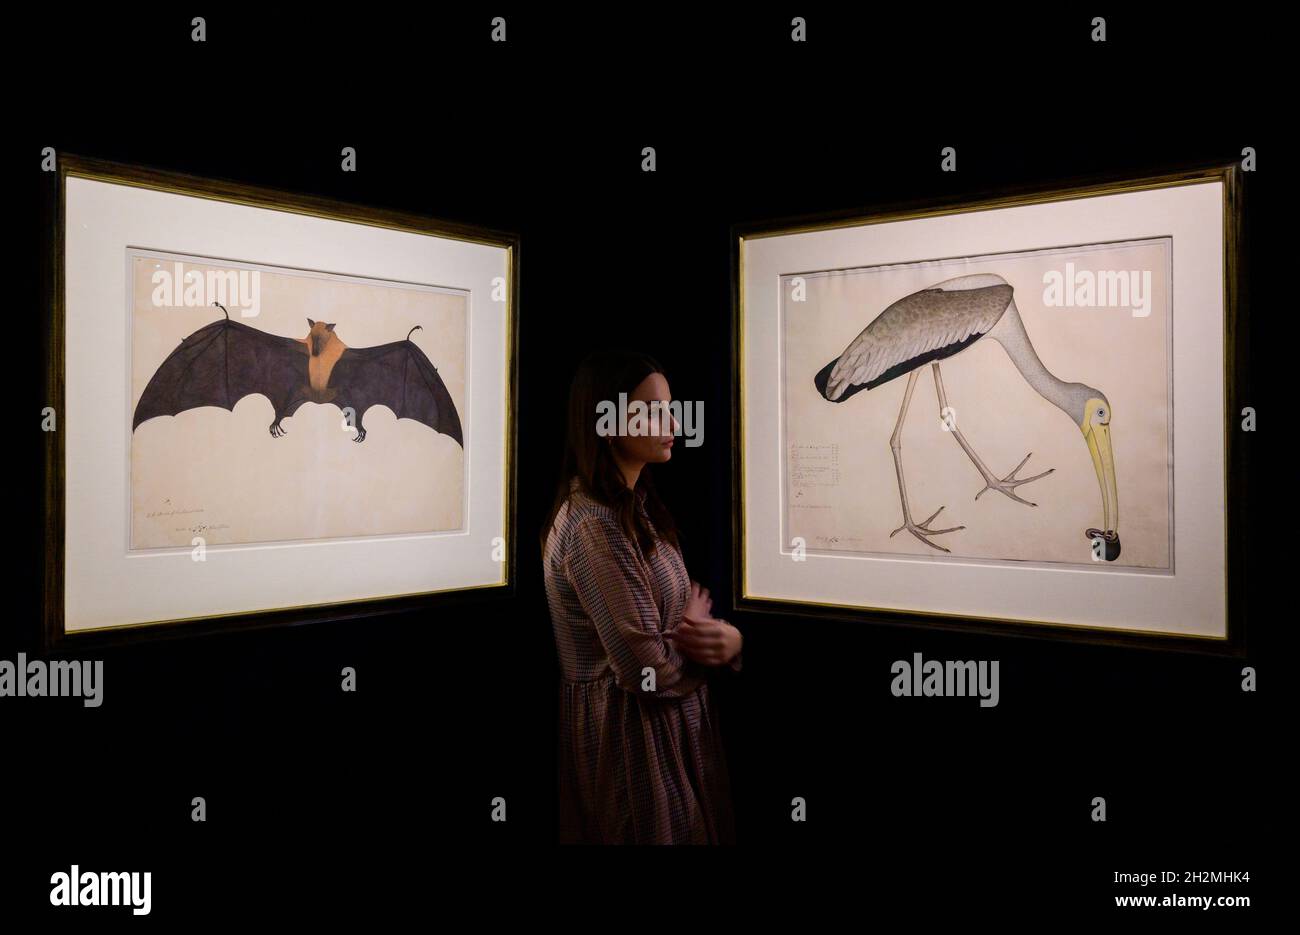 Sotheby’s, London, UK. 22 October 2021. IN AN INDIAN GARDEN: The Carlton Rochell Collection of Company School Paintings sale preview. Left: A Great Indian Fruit Bat or Flying Fox (Pteropus Giganteus), from the Impey Album, signed by Bhawani Das, Company School, Calcutta, circa 1778-83. Estimate: £300,000- 500,000; Right: A Painted Stork (Mycteria Leucocephala) eating a Snail, from the Impey Album, signed by Shaykh Zayn al-Din, Company School, Calcutta, dated 1781. Estimate: £200,000-300,000. Credit: Malcolm Park/Alamy. Stock Photo